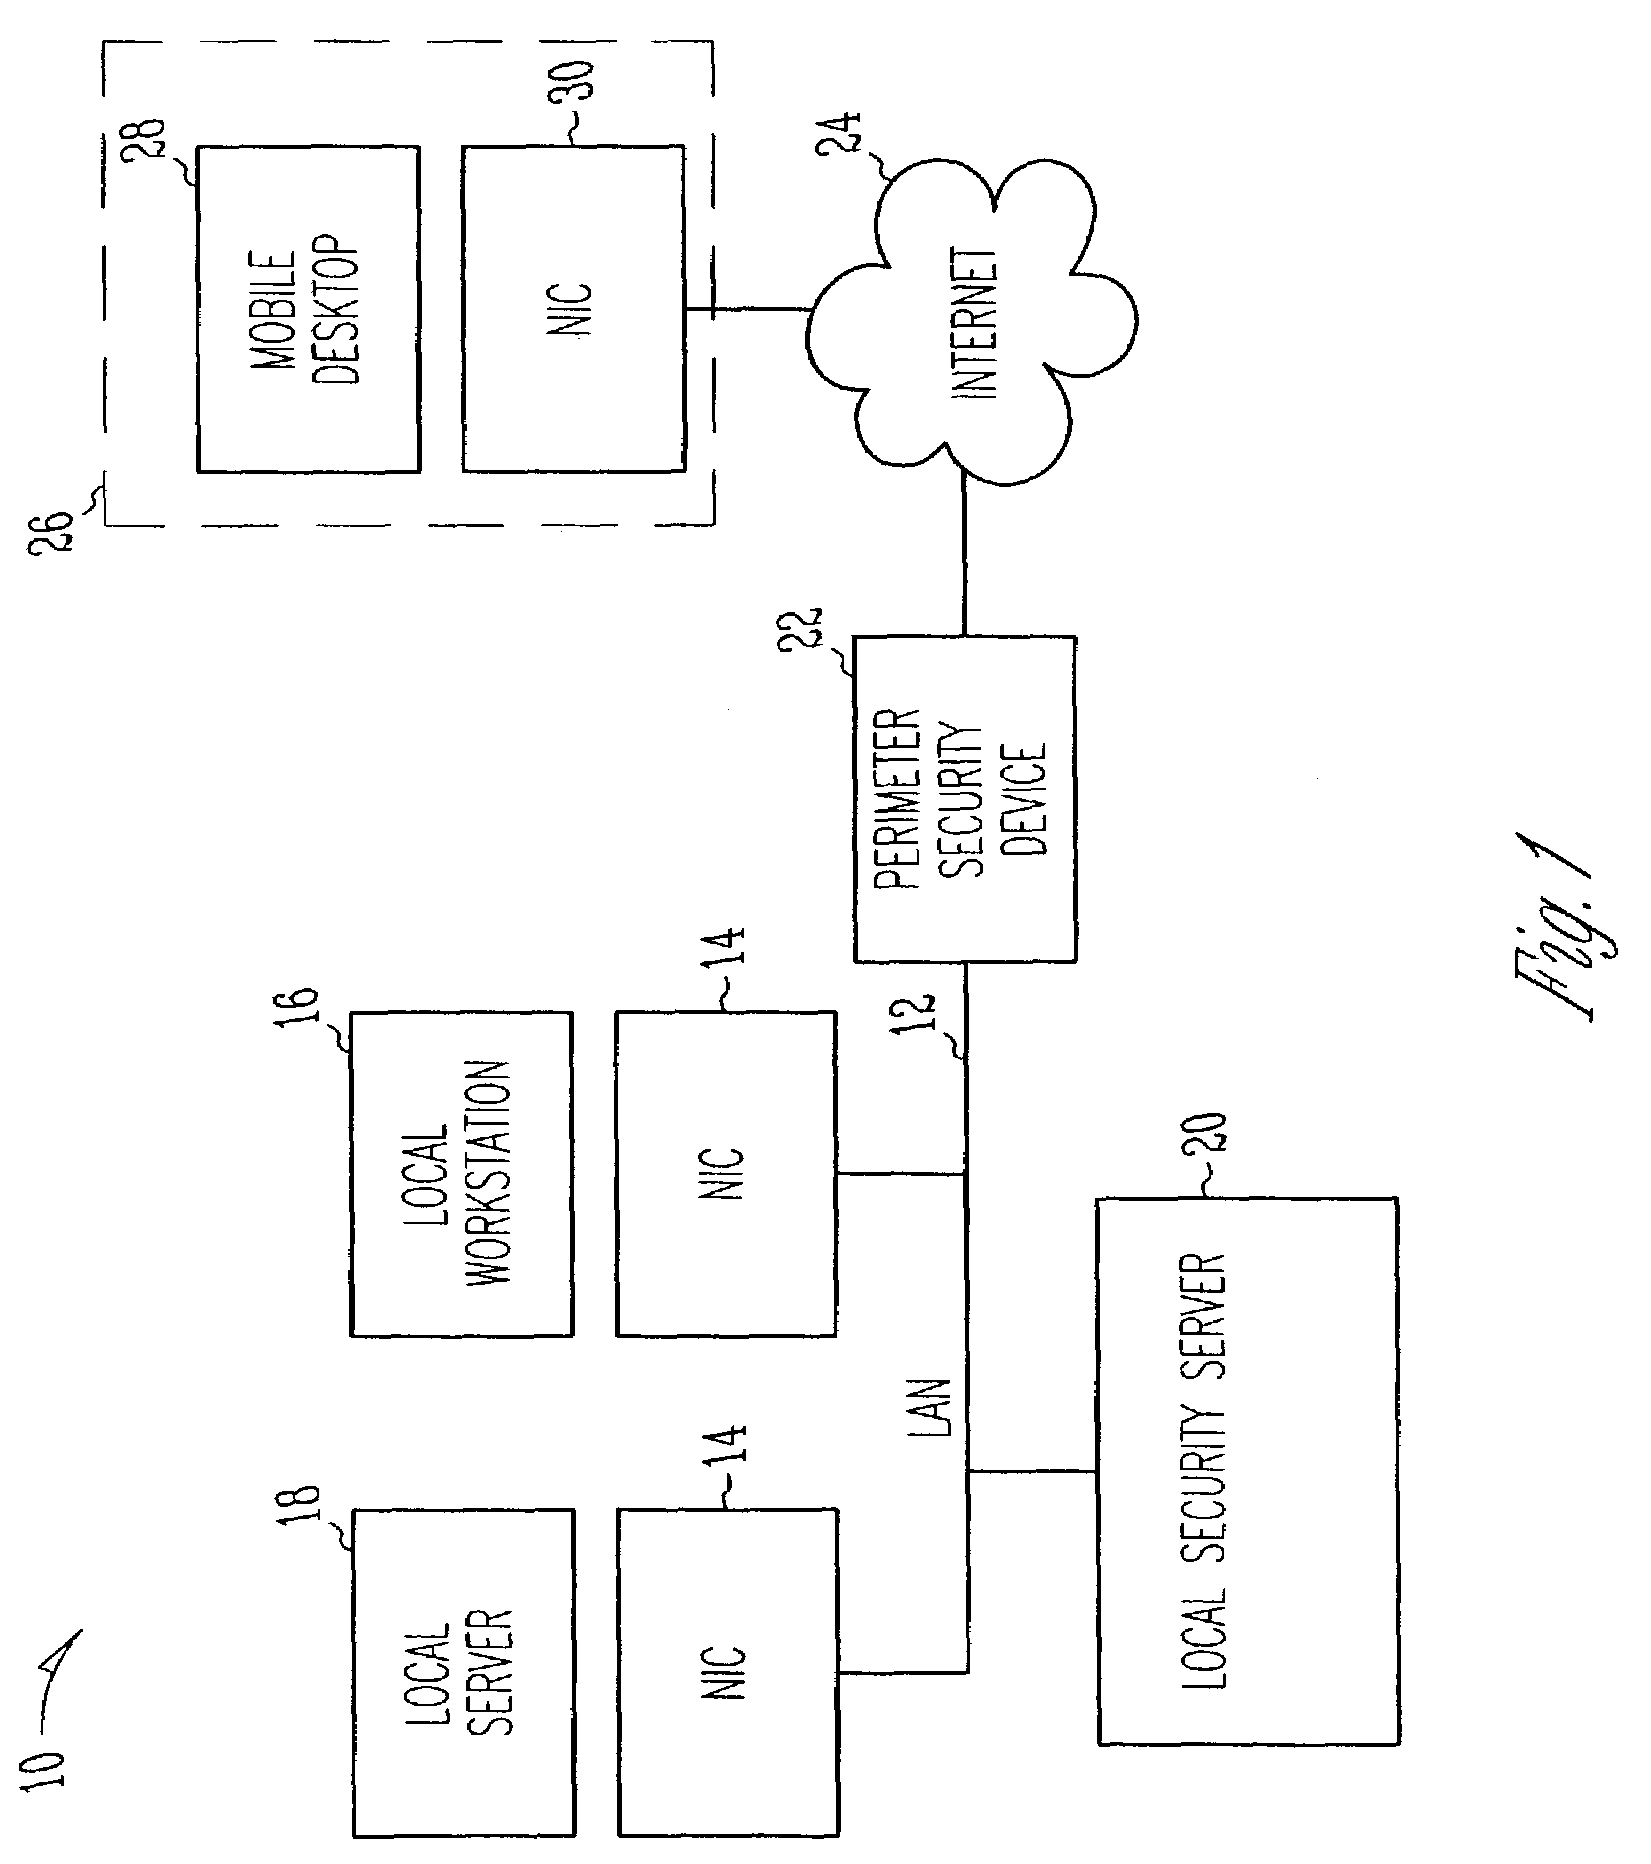 Distributed firewall system and method